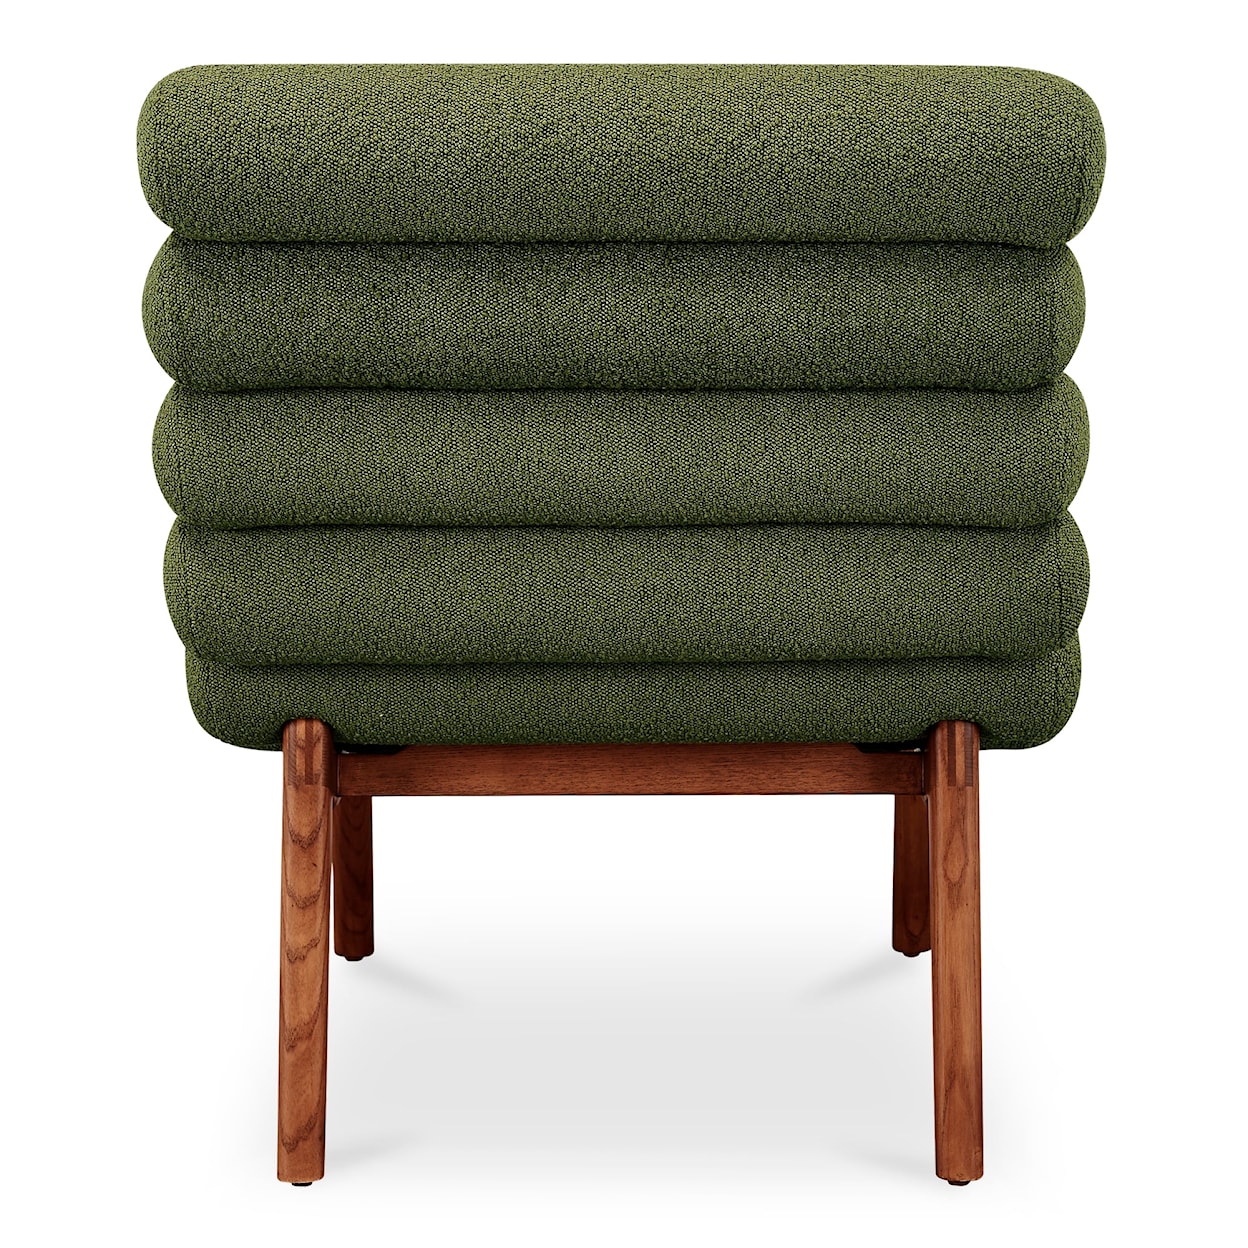 Moe's Home Collection Arlo Accent Chair